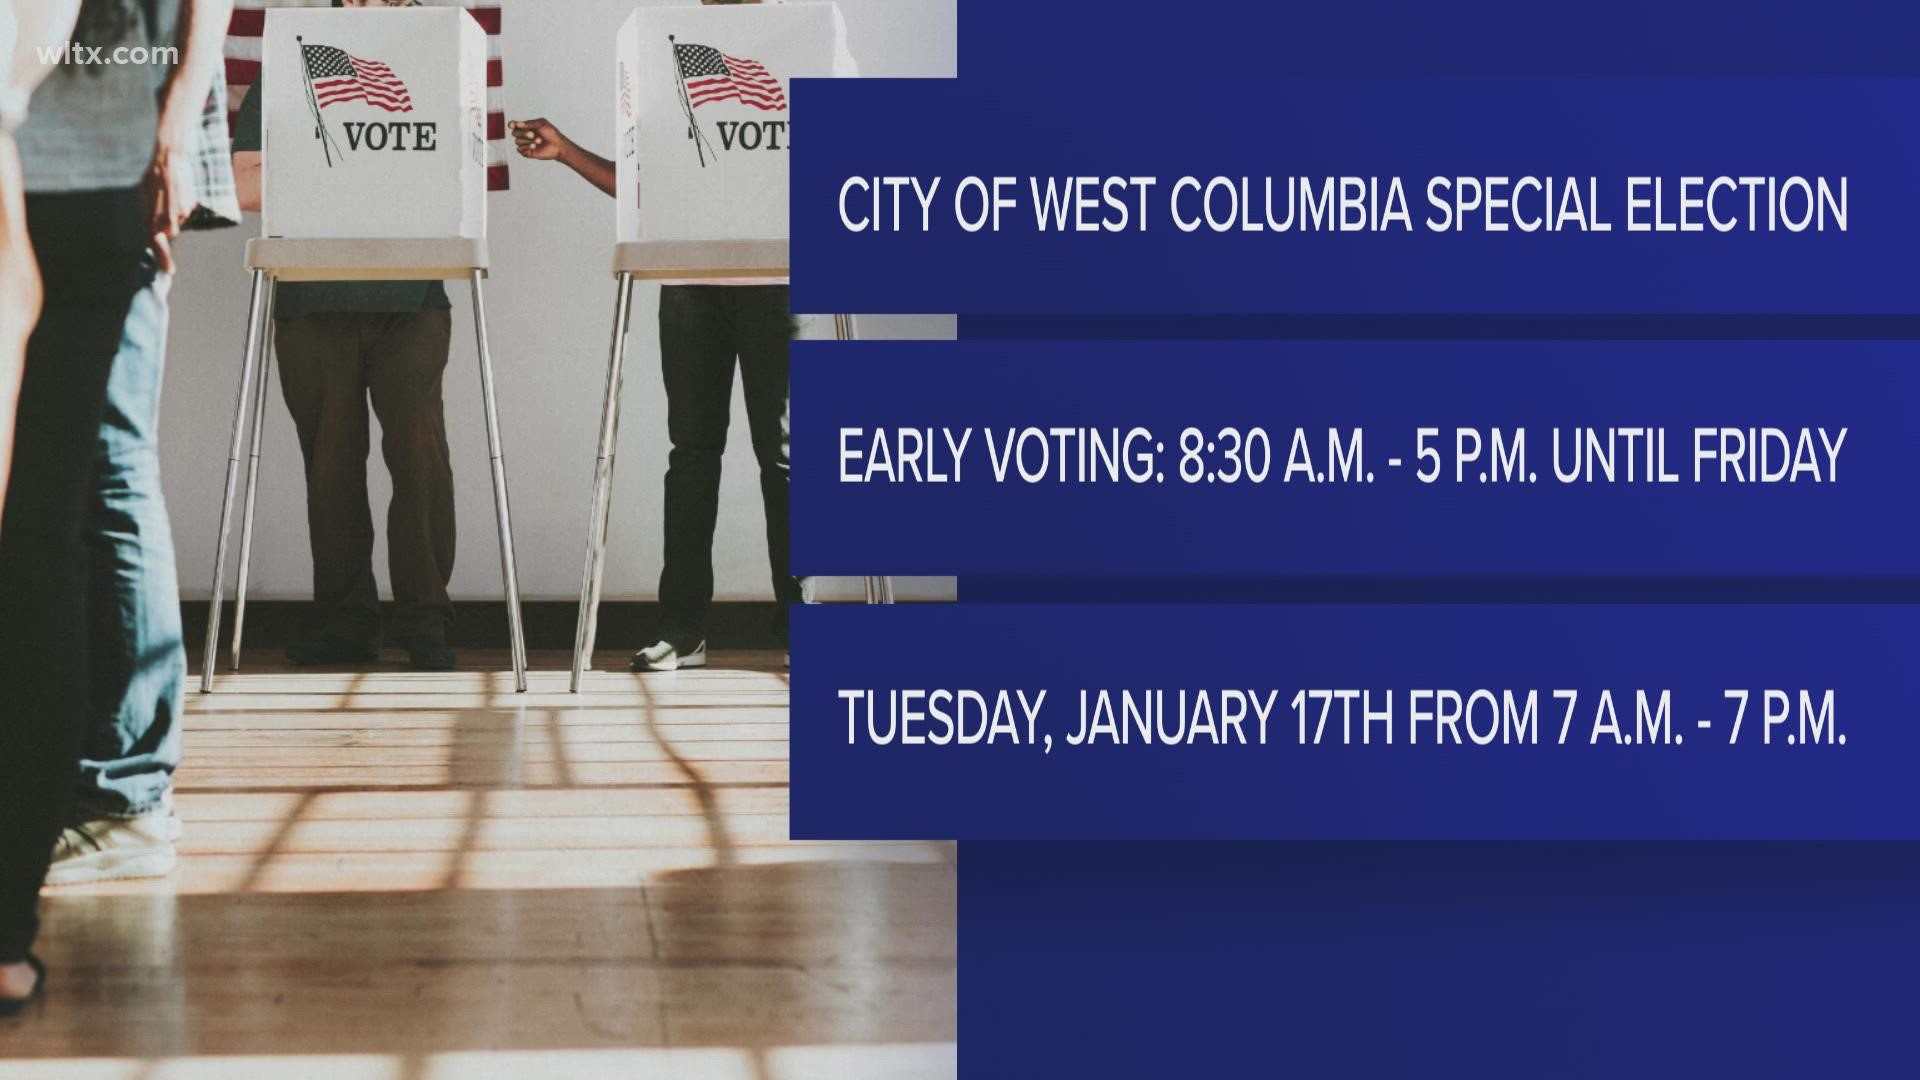 Early voting is underway for elections in West Columbia and Gaston. Here's what you need to know.